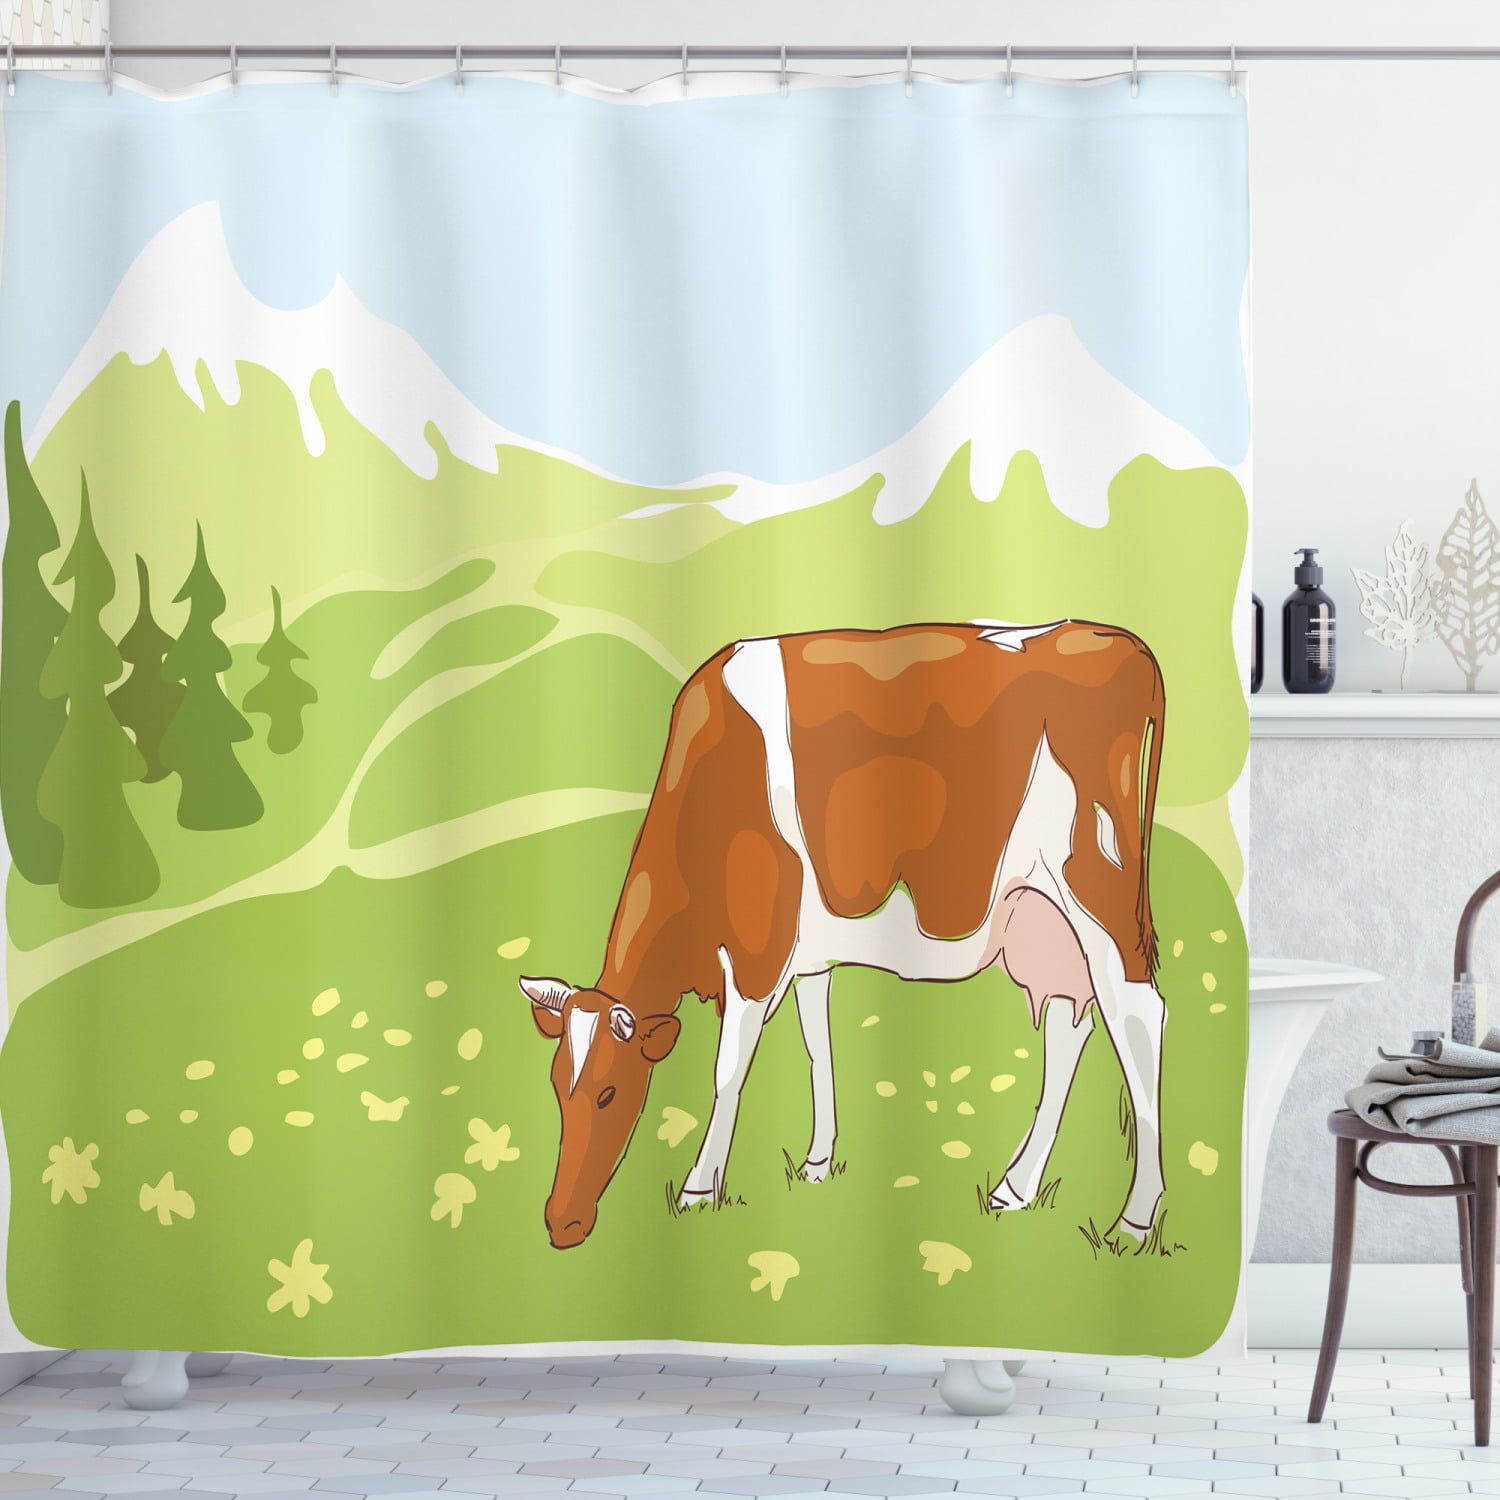 Eco-friendly Black and White Milk Cow Pattern Dairy Animal Pattern Shower Curtain Waterproof Bathroom Curtain Liner with Hook 60 x 72